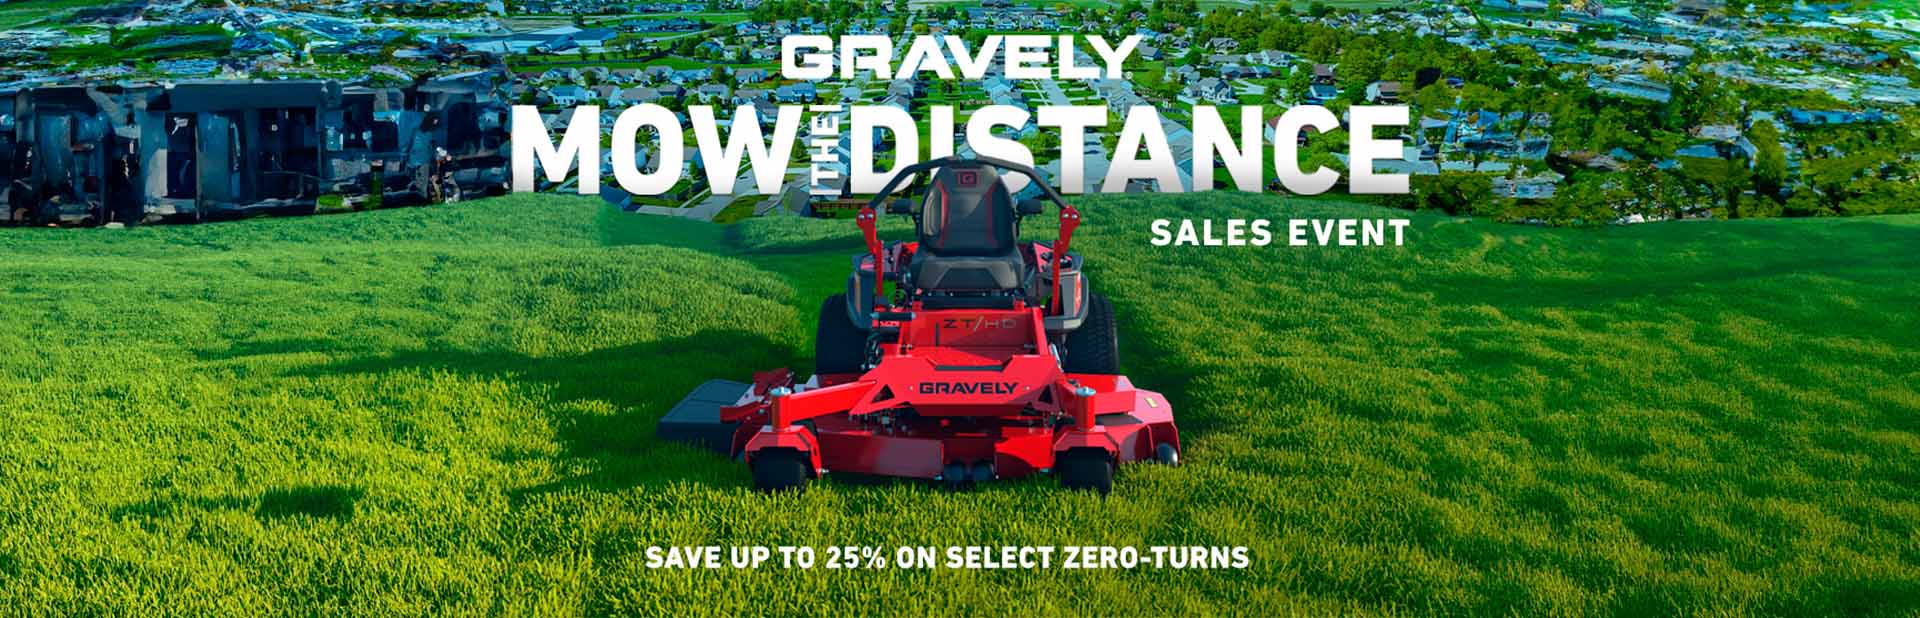 MOW THE DISTANCE SALES EVENT